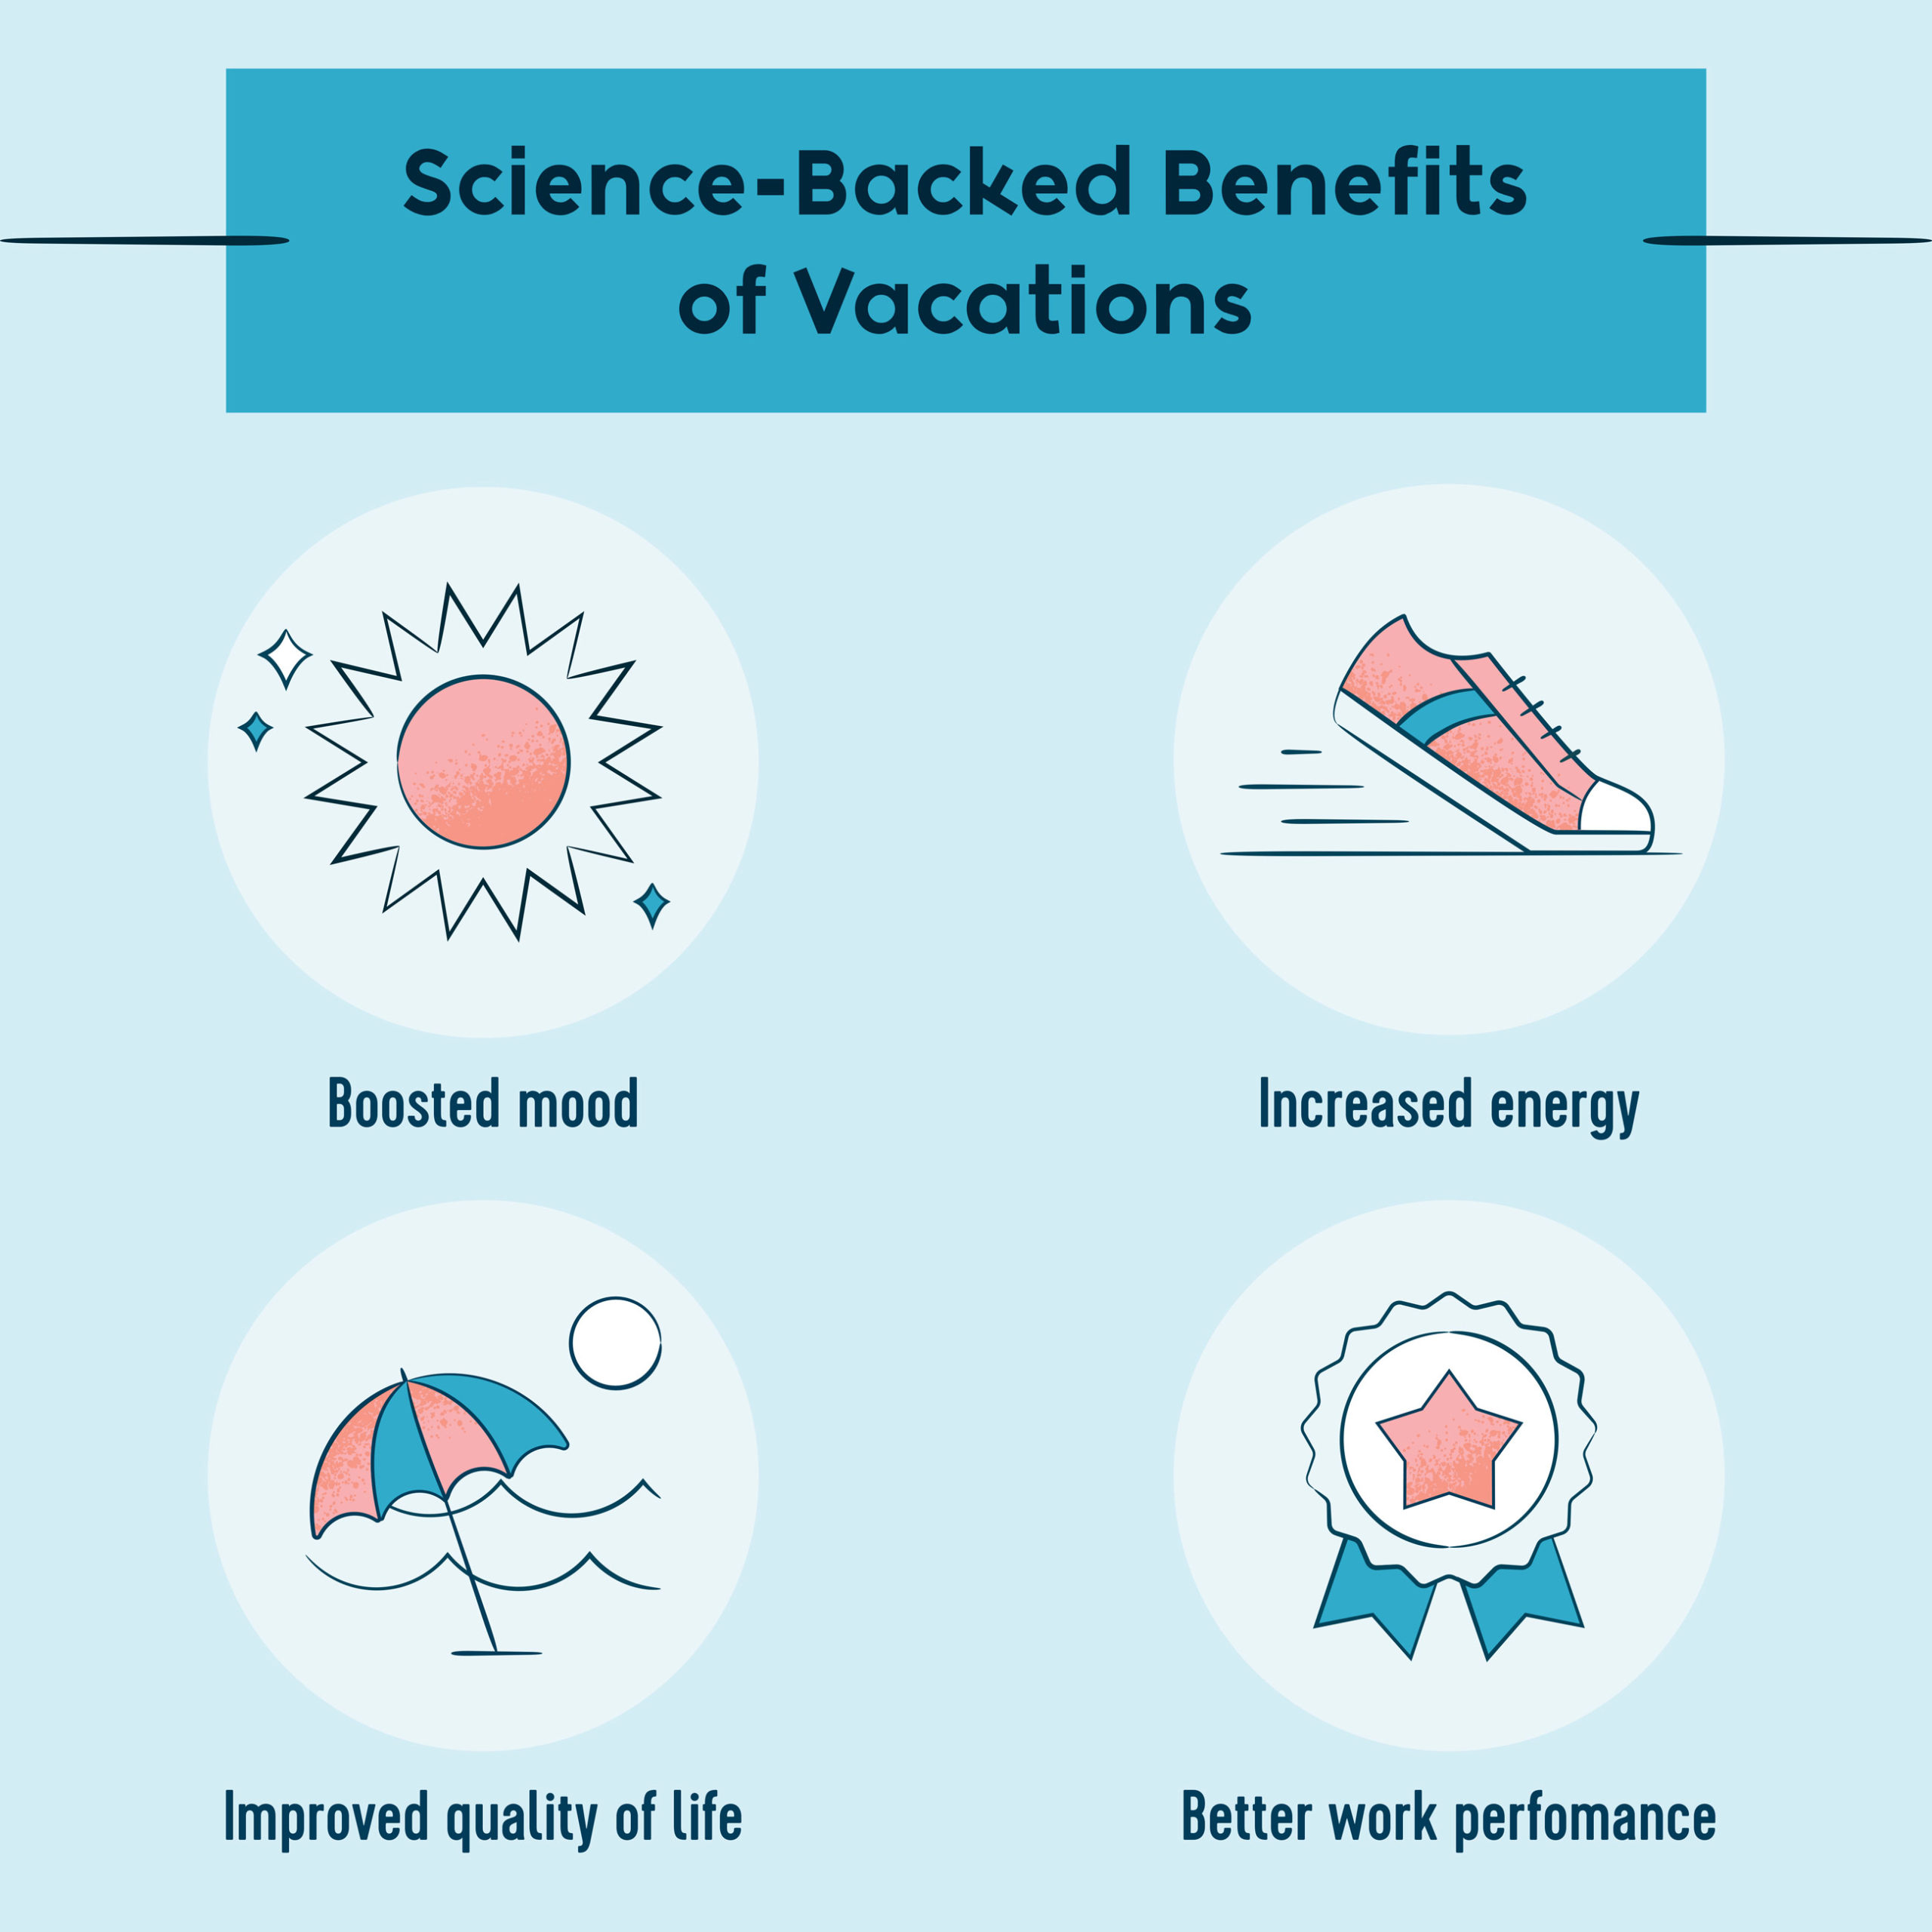 science-backed benefits of vacations